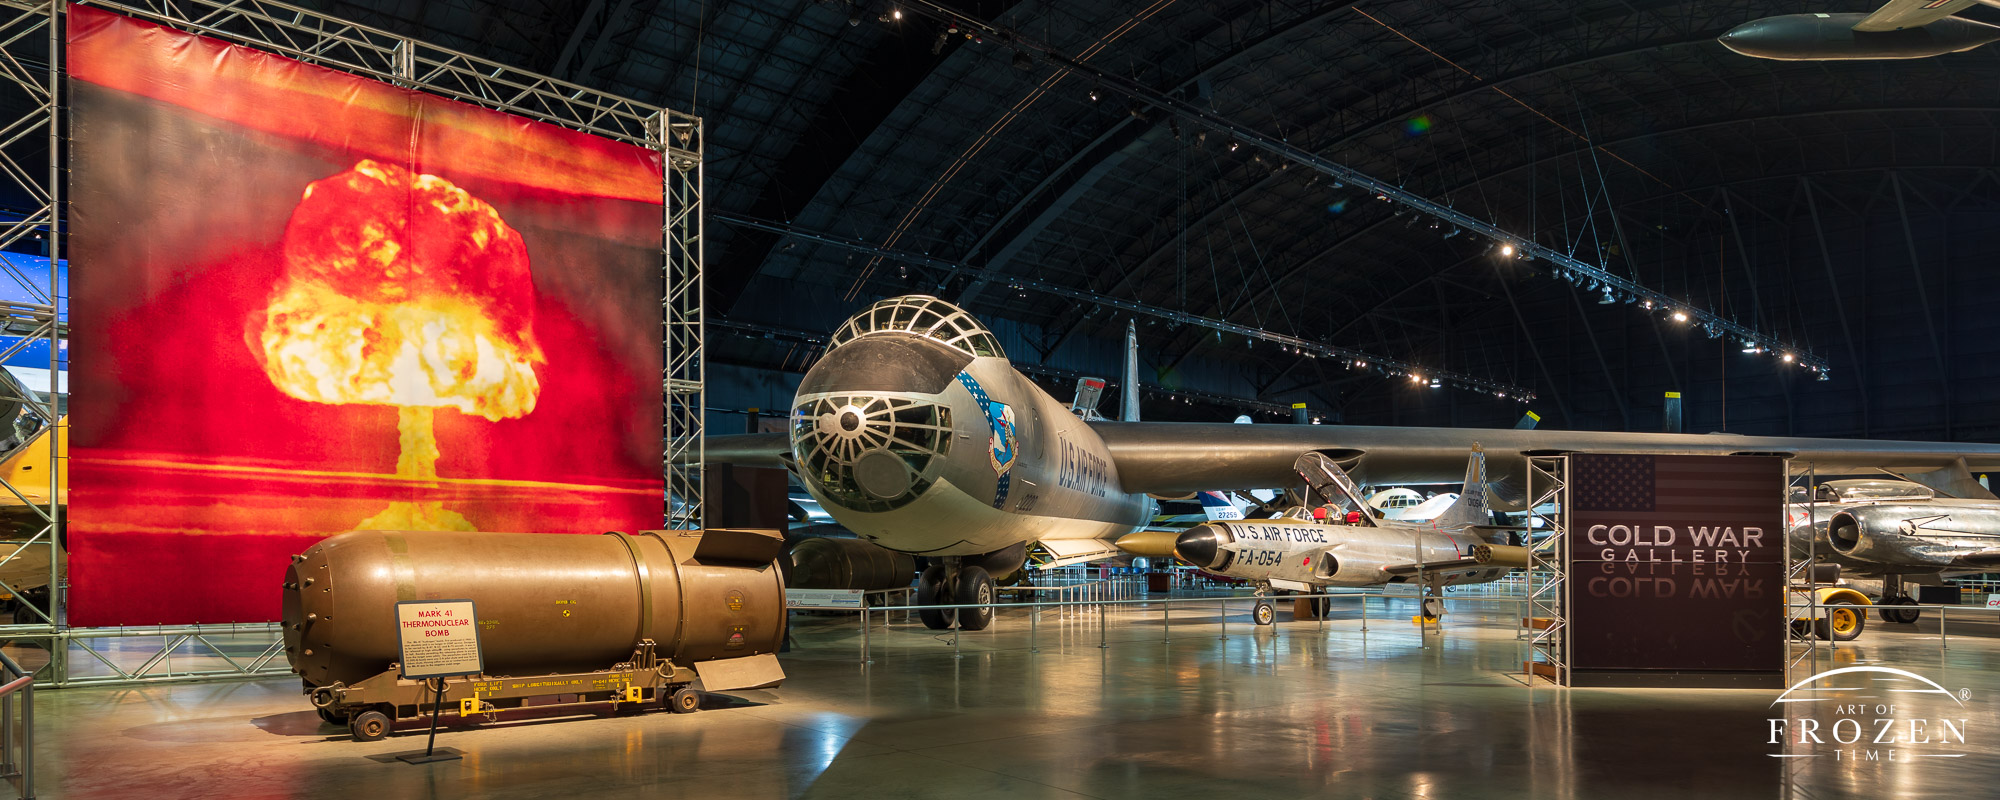 The front view of the B-36 Bomber and its multi window cockpit as it sits under museum lights at the National Museum of the US Air Force